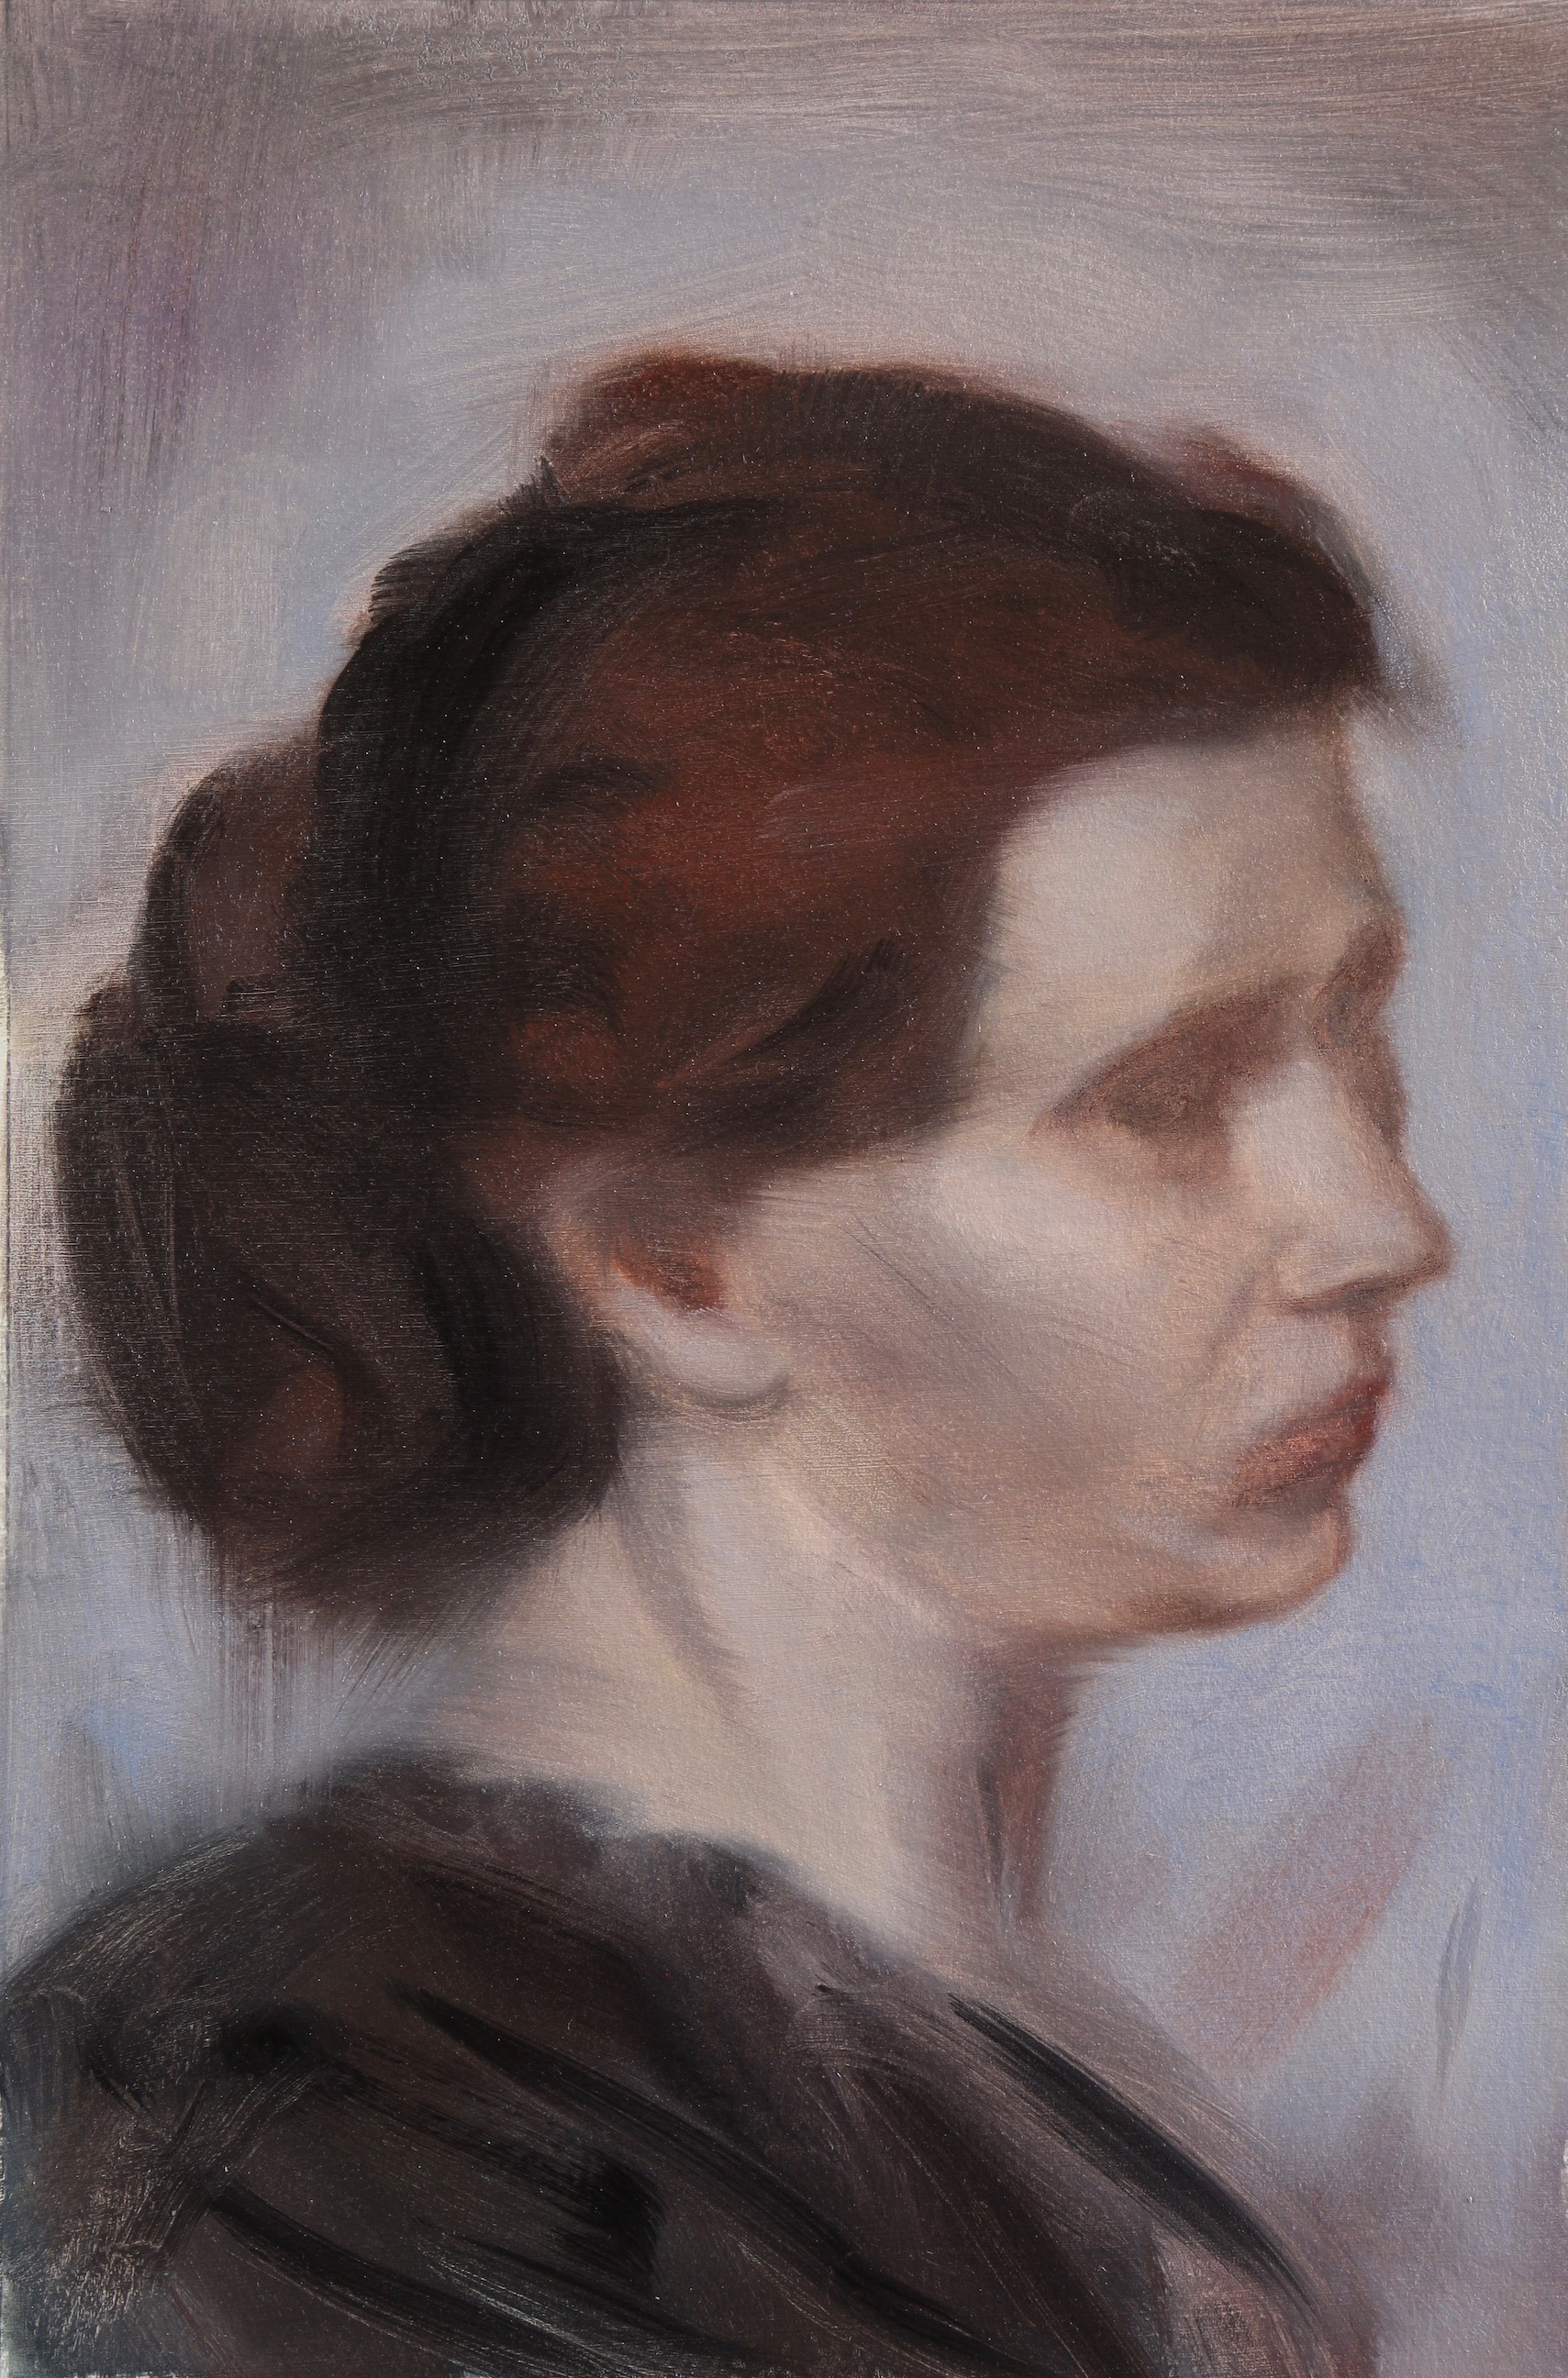 Head of a Woman (after Degas), Oil on paper, 29x19cm, 2017